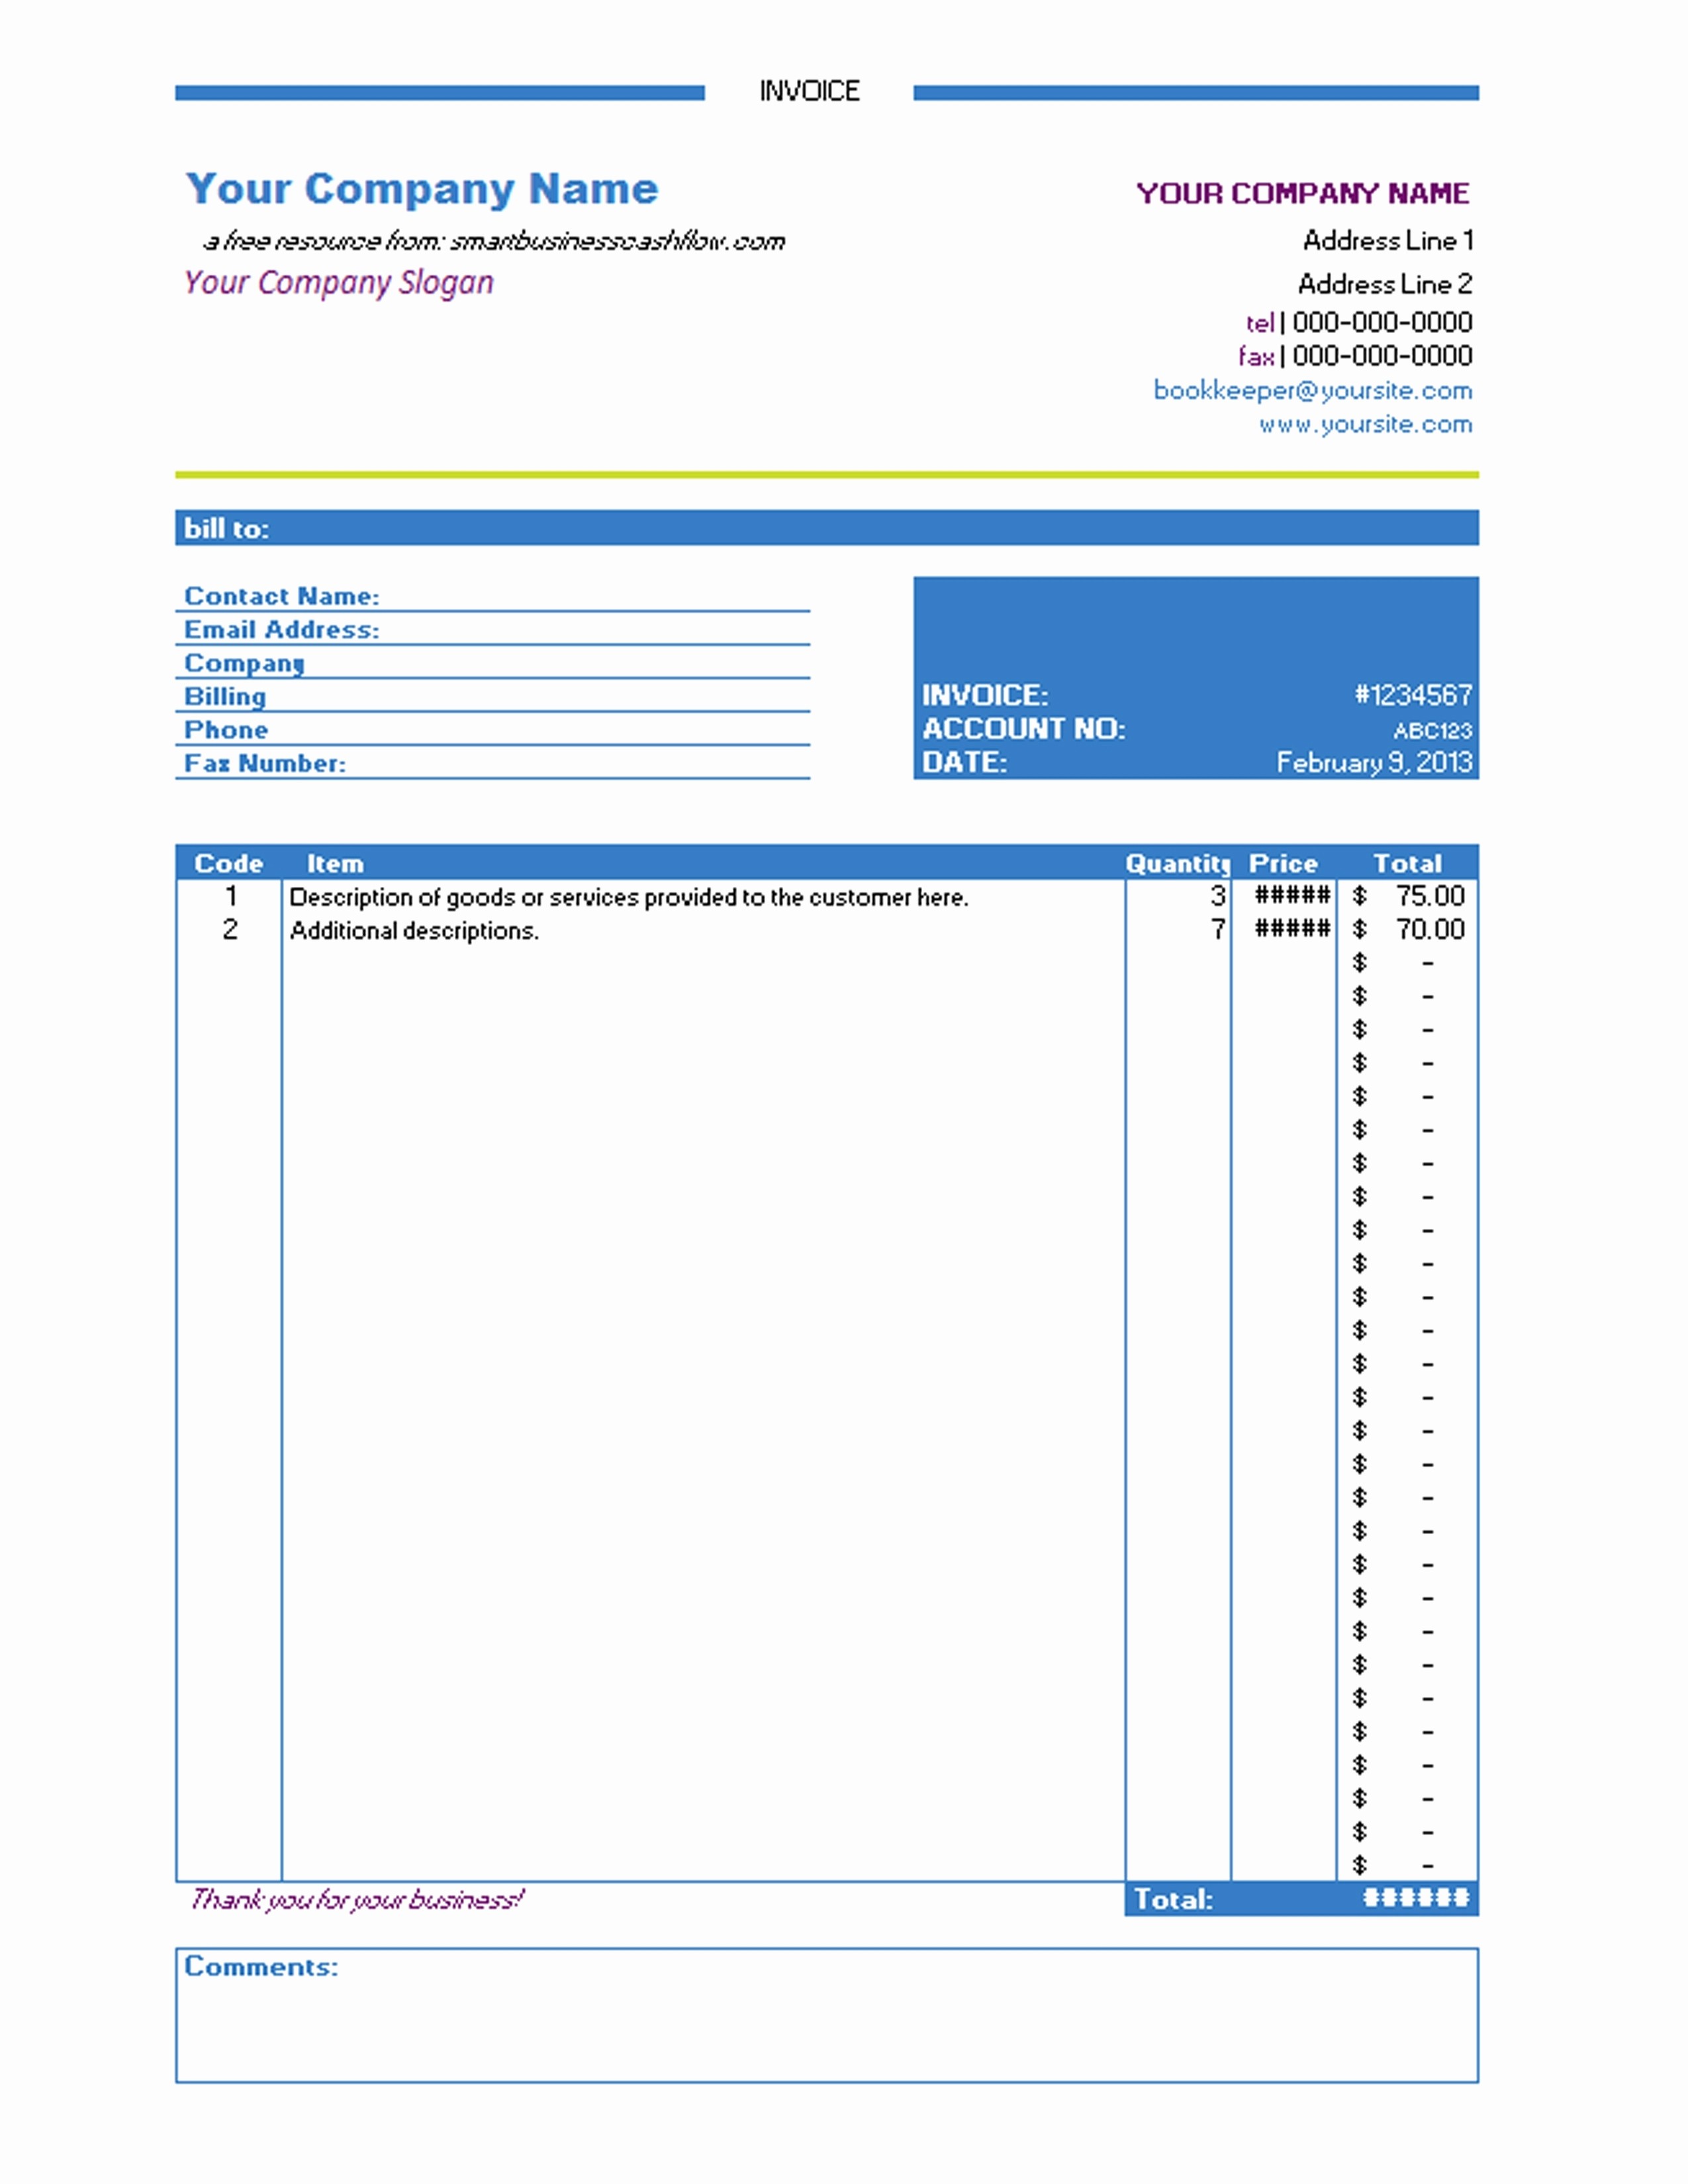 Invoice Template Excel Download Free New Invoice Template Free Download Excel Invoice Template Ideas